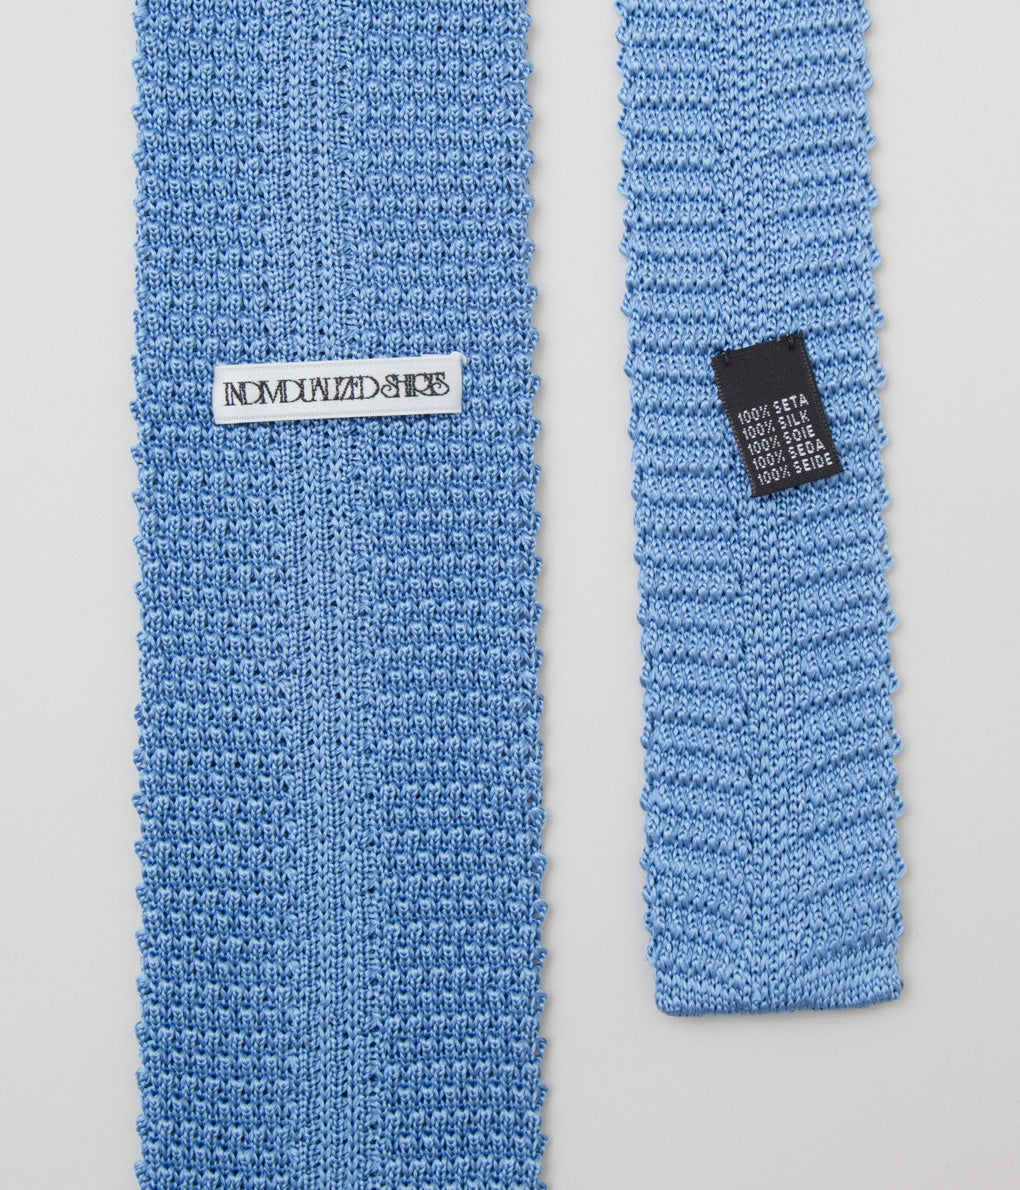 INDIVIDUALIZED ACCESSORIES "KNIT TIE" (BLUE)